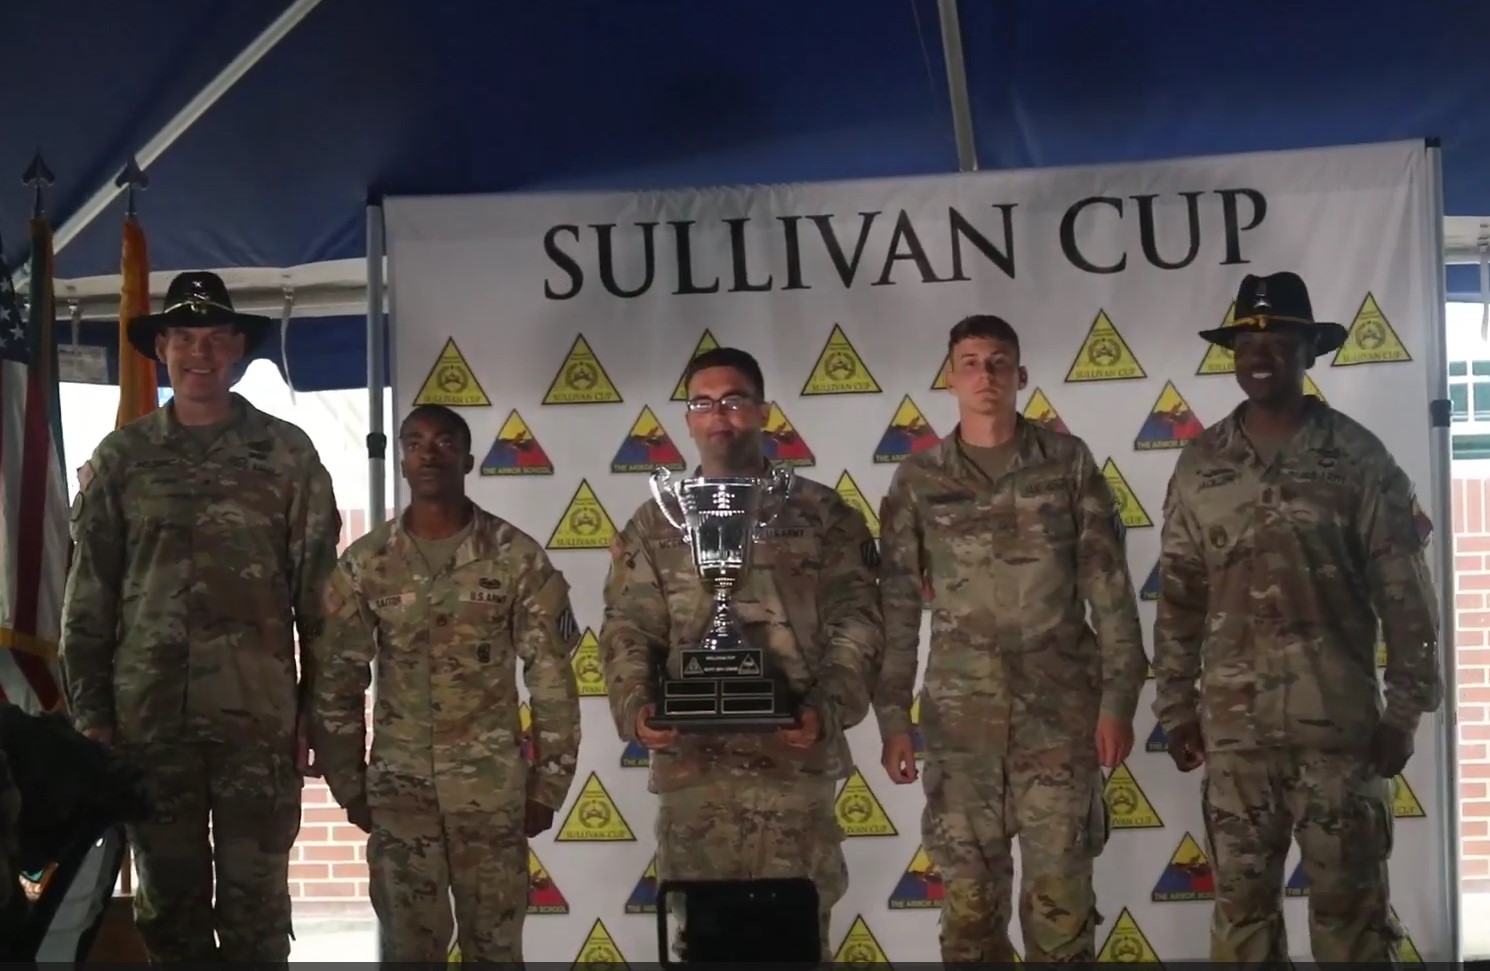 Spartan Soldiers Win The Best Armored Crew at Sullivan Cup 2022